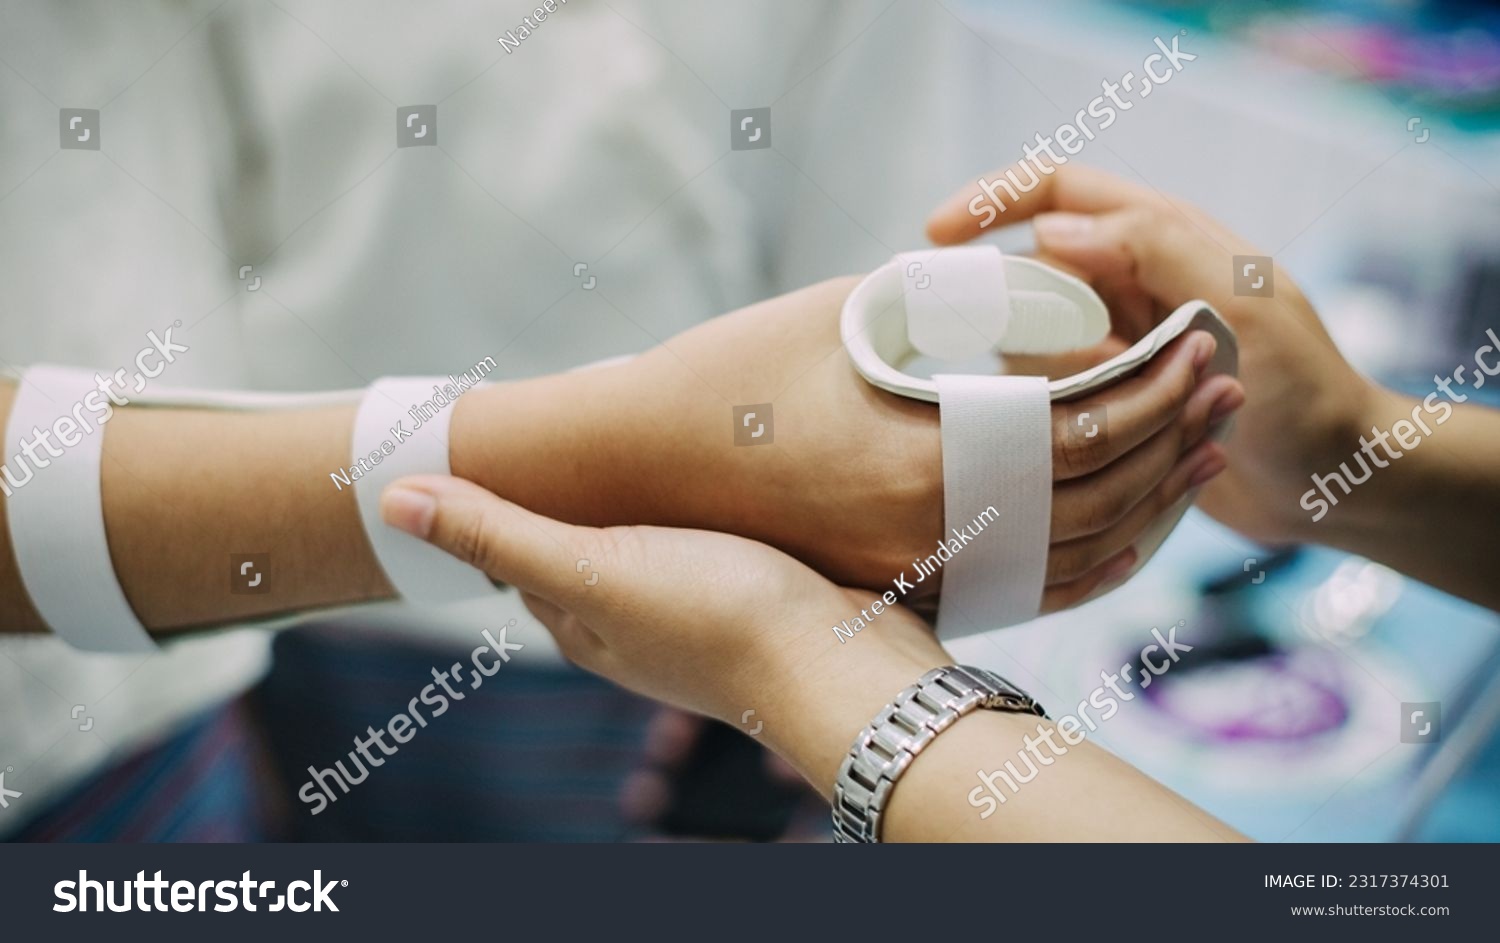 Therapist making asissistive device for immobilize patient hand. Splint service for hand injury rehabilitation of occupational therapy clinic. #2317374301